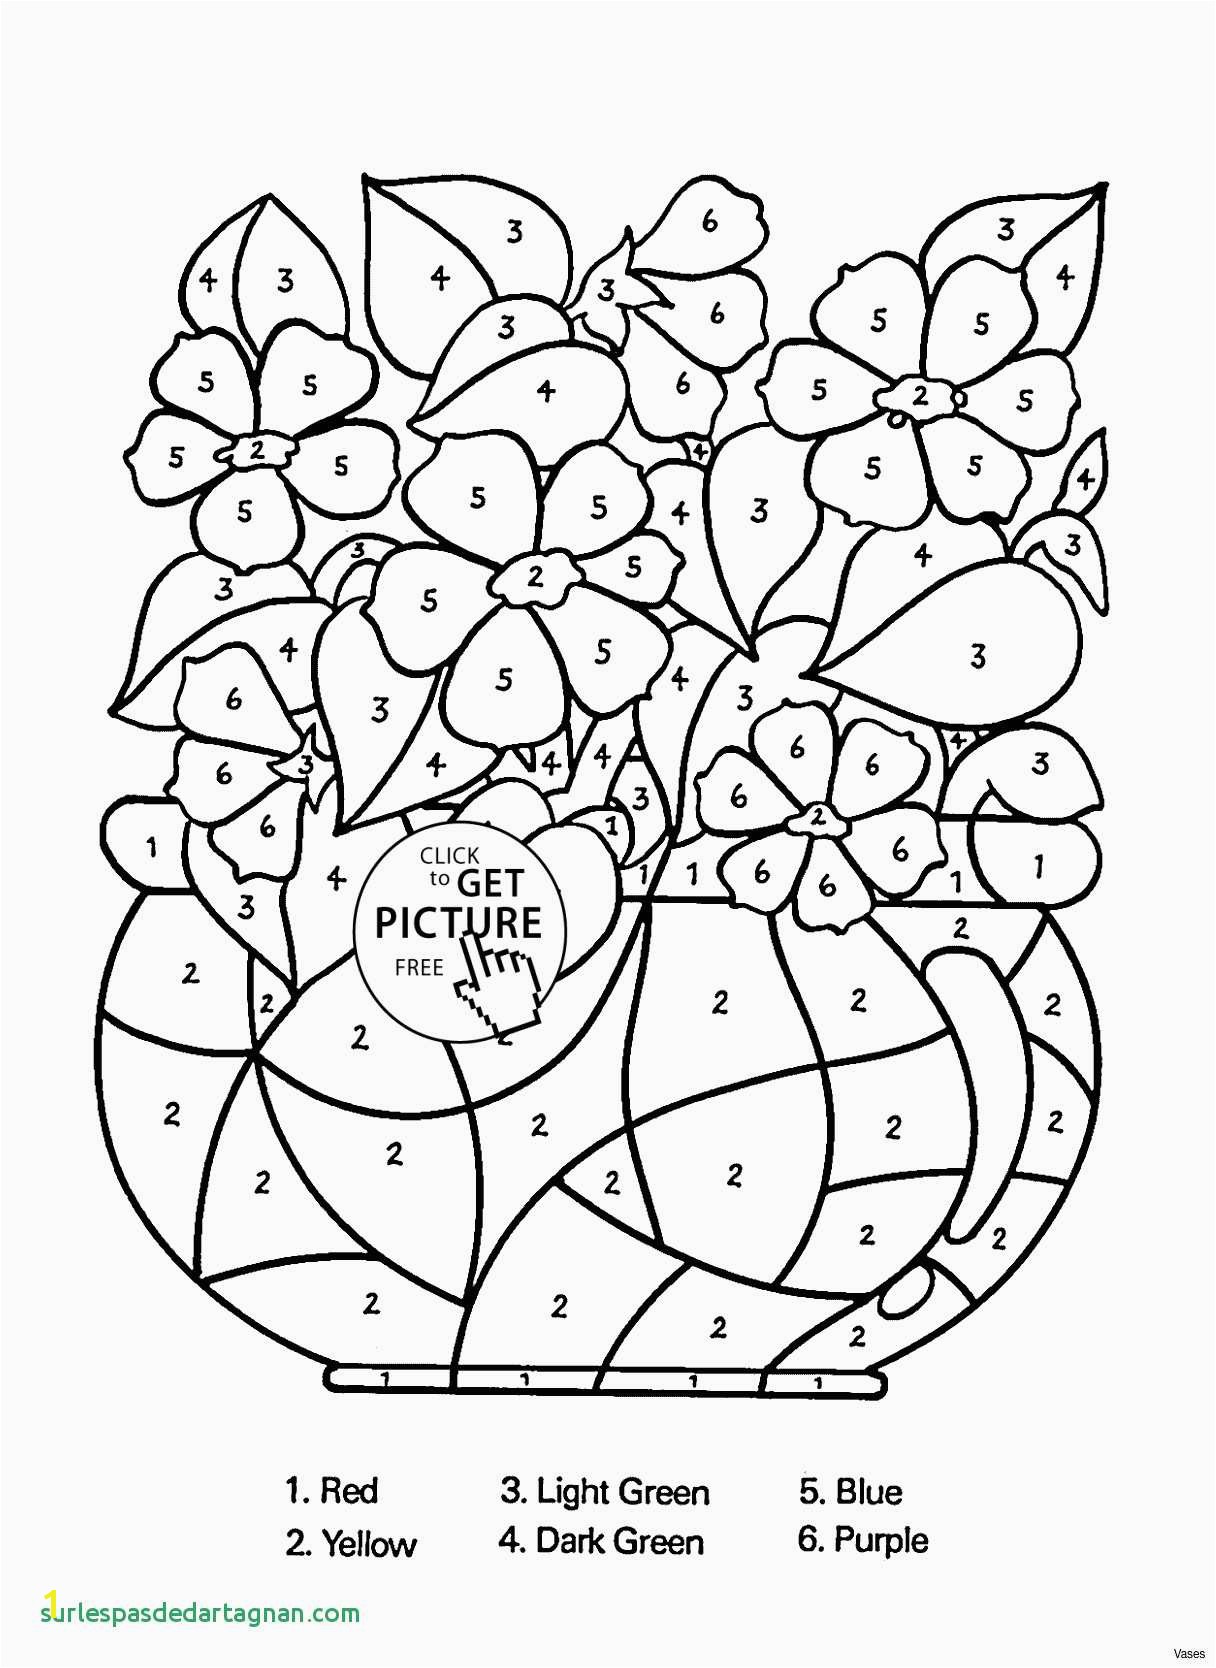 Flower Coloring Pages for Preschoolers Vases Flower Vase Coloring Page Pages Flowers In A top I